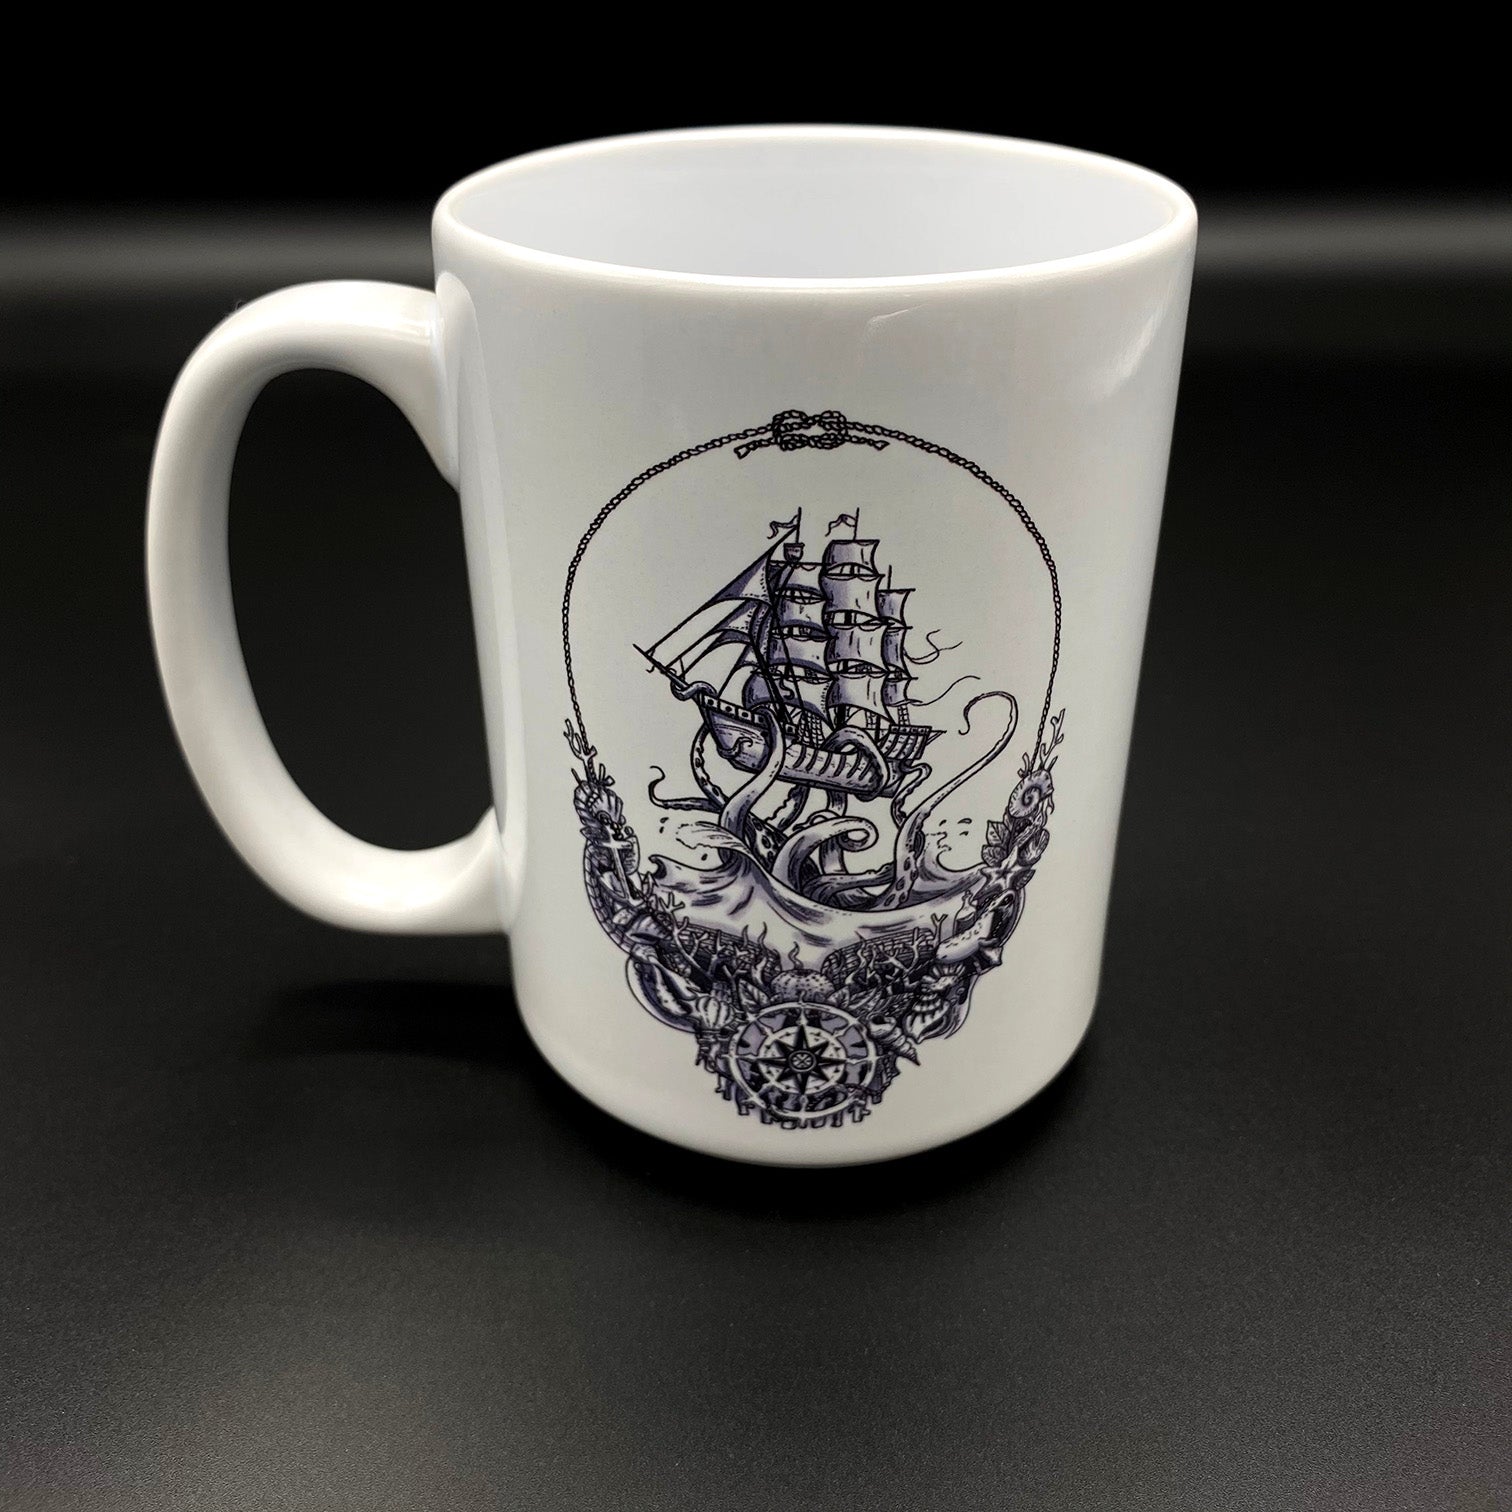 A white ceramic cup with lost sailor logo from Earth Kind Designs TM